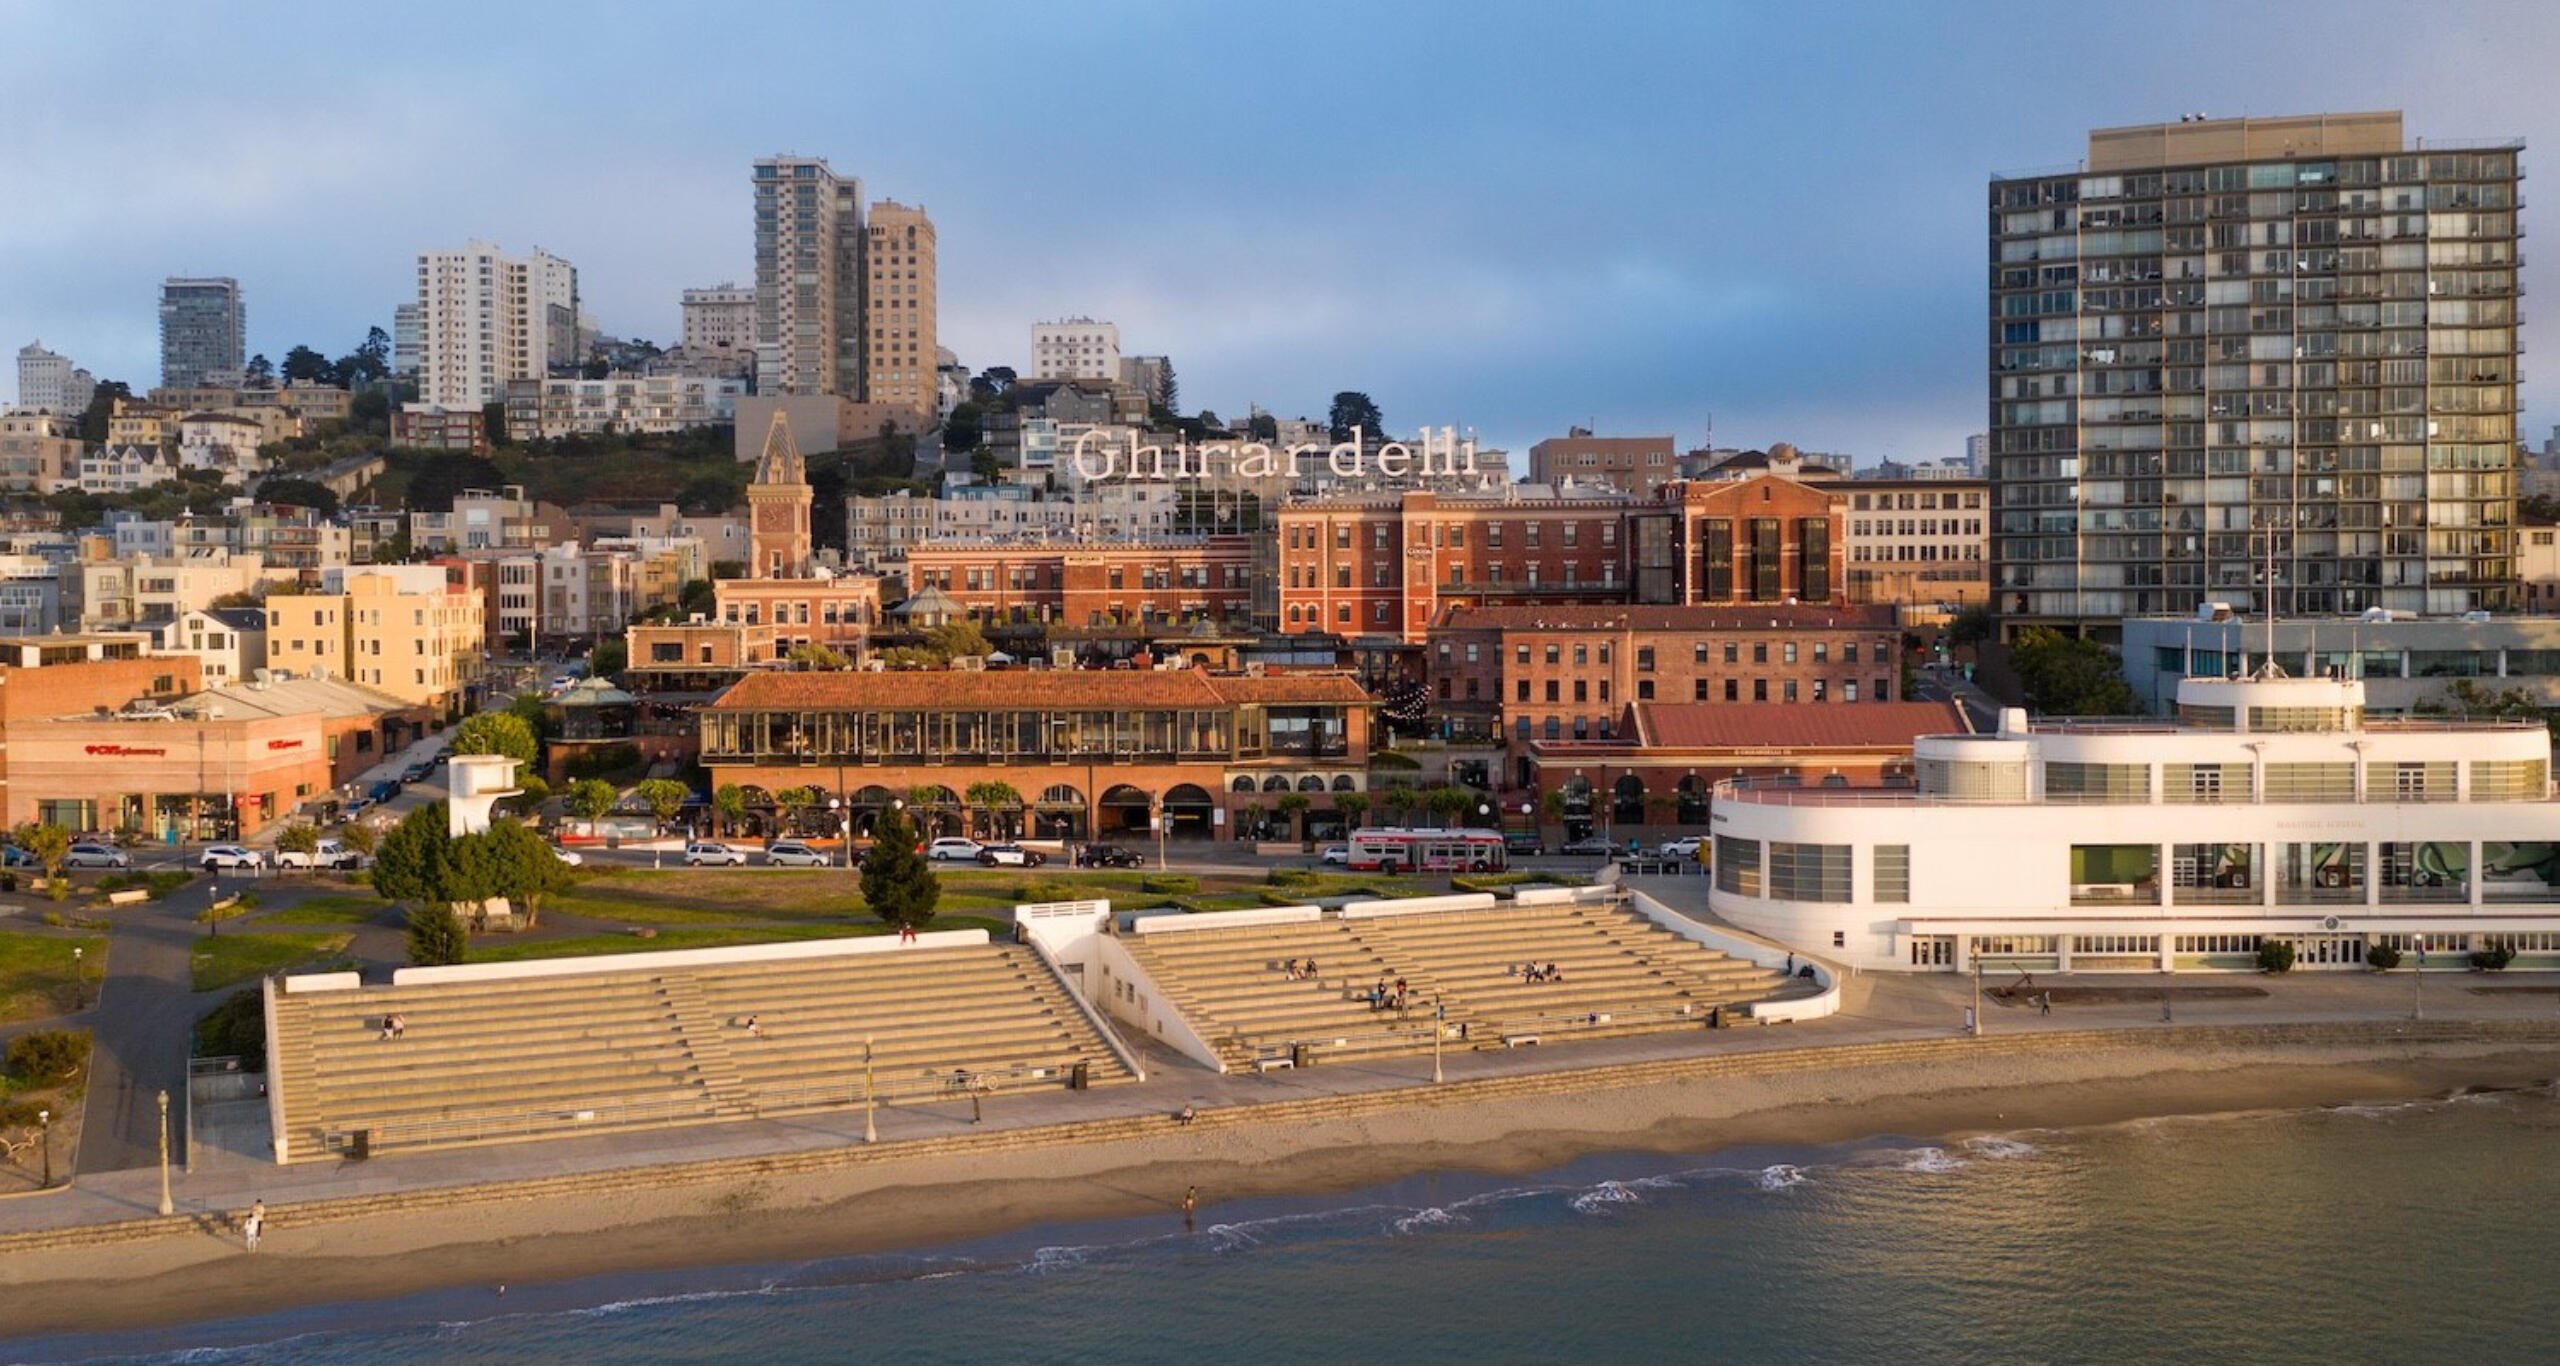 Ghirardelli Square situated on the San Francisco Bay with mid-rise buildings in the background